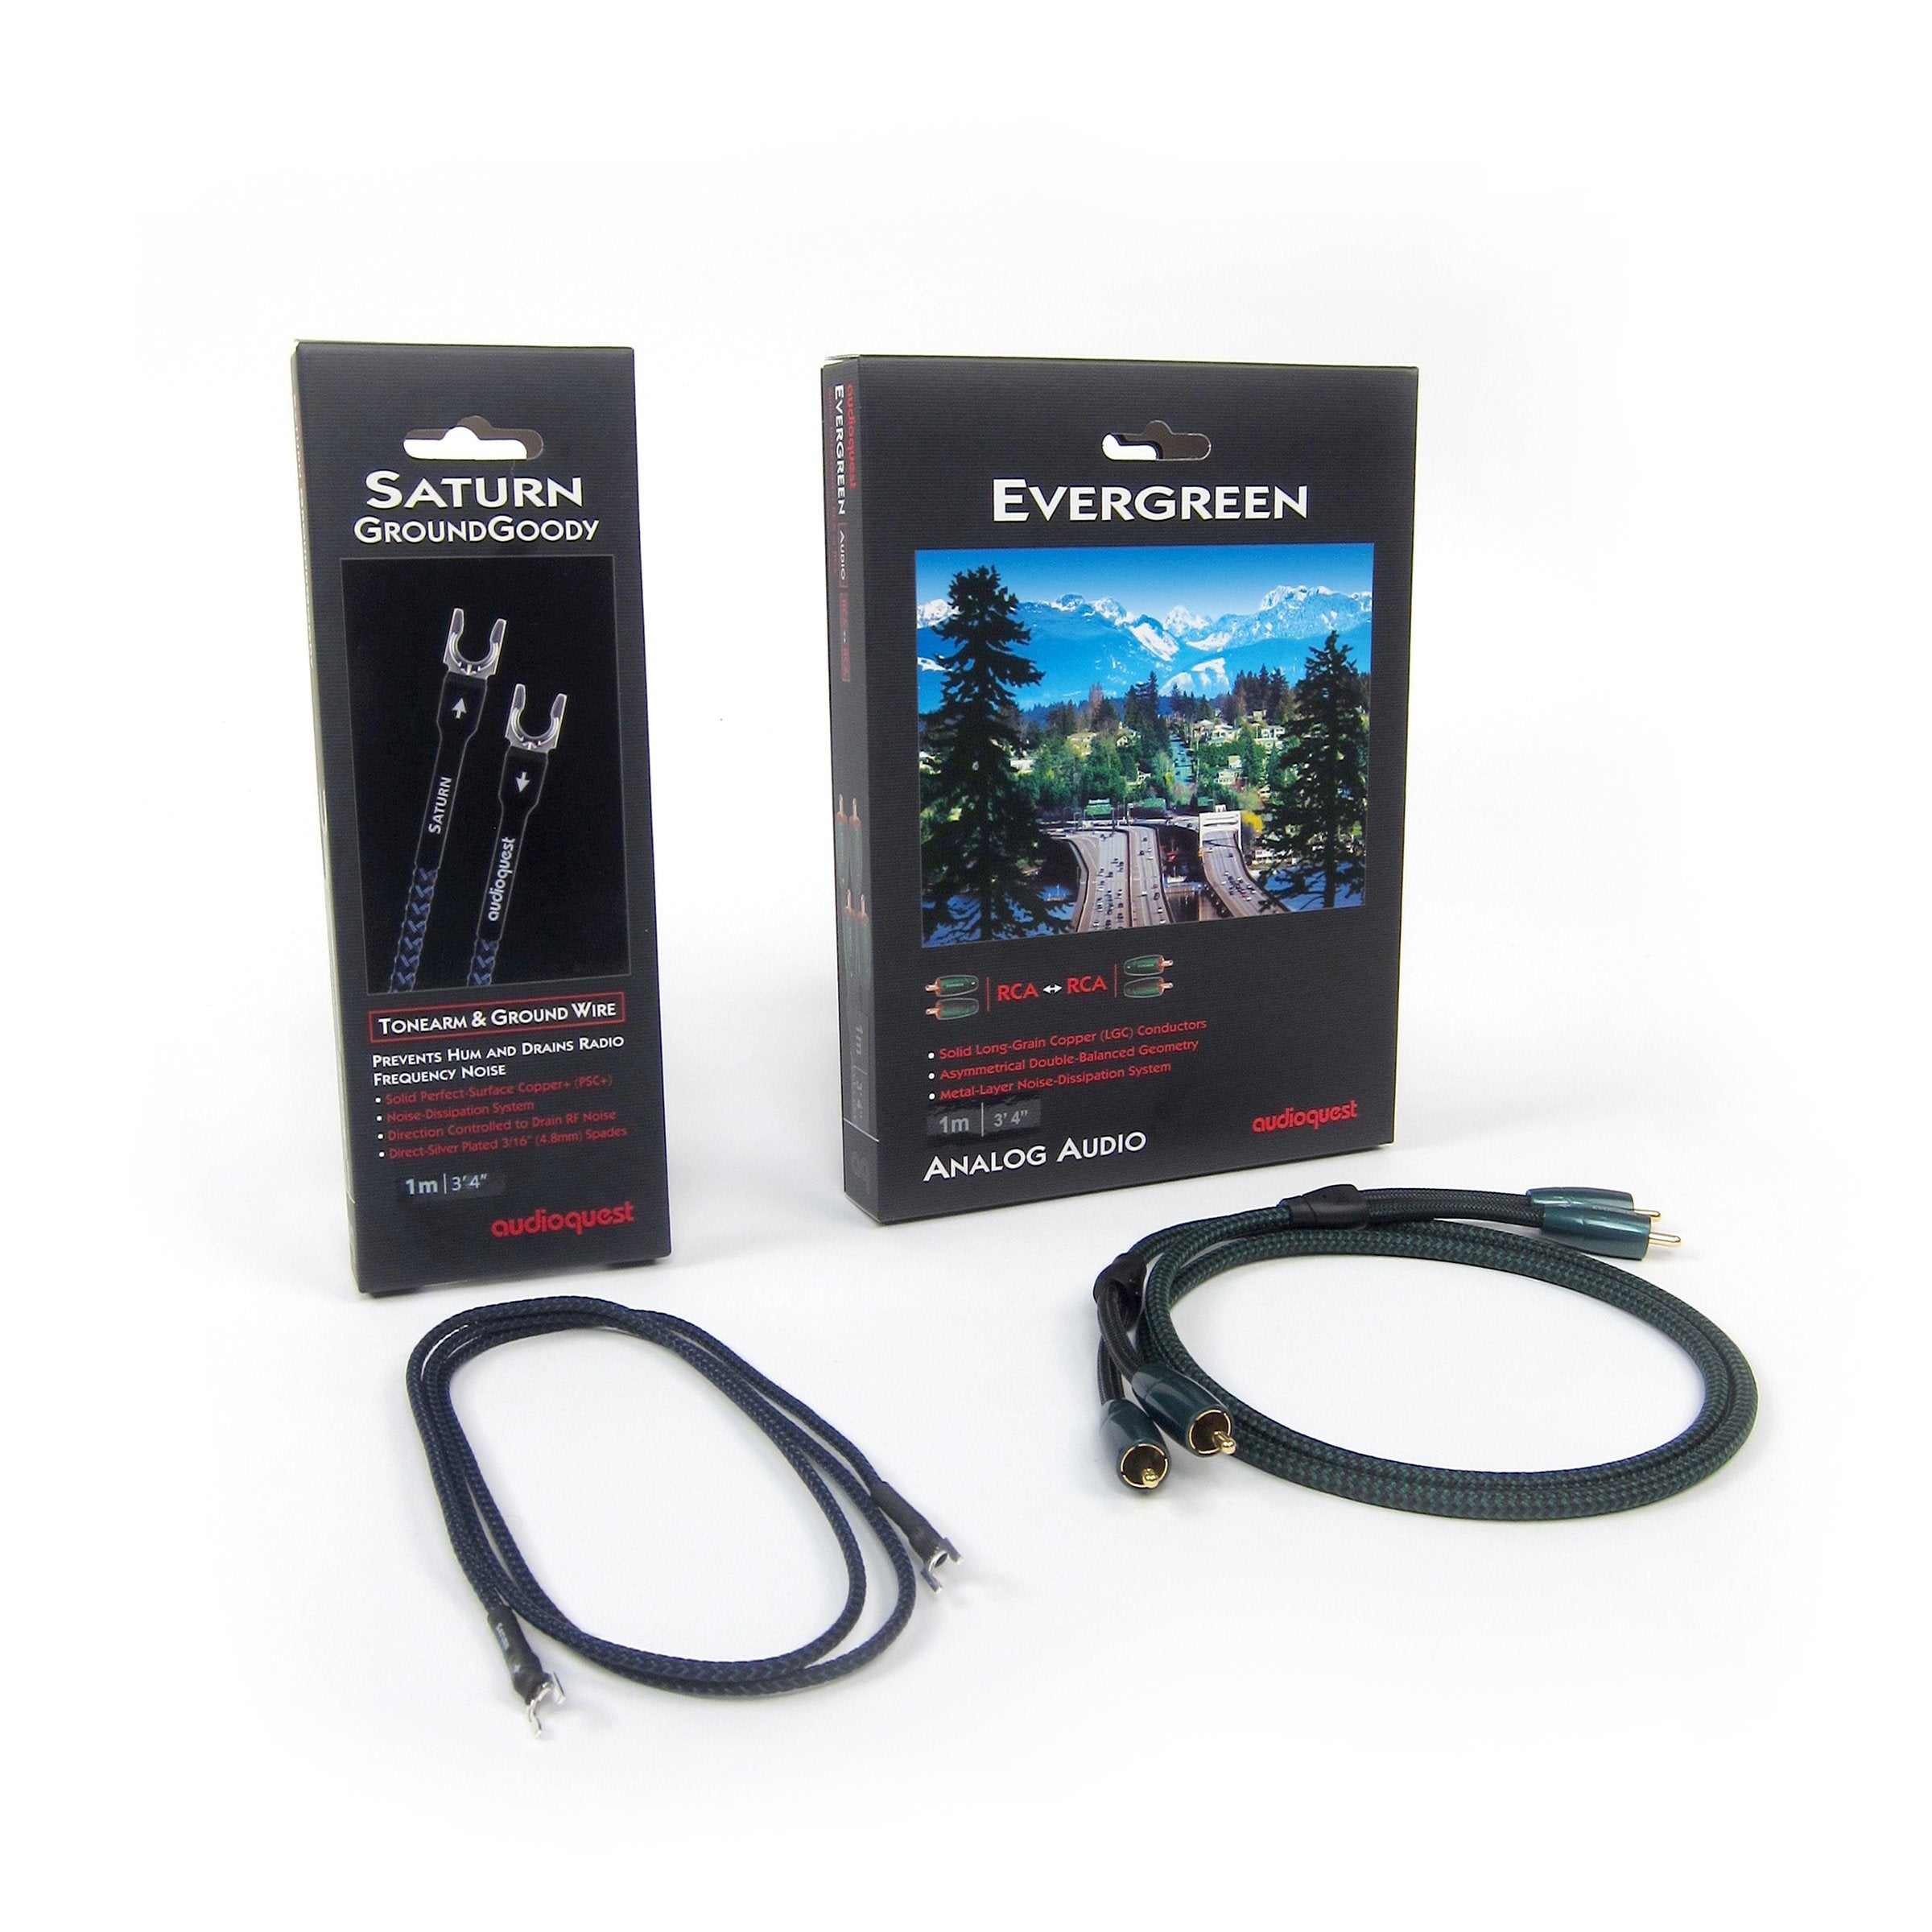 Audioquest: Evergreen RCA + Saturn Groundwire Kit for Turntables (1.0M)